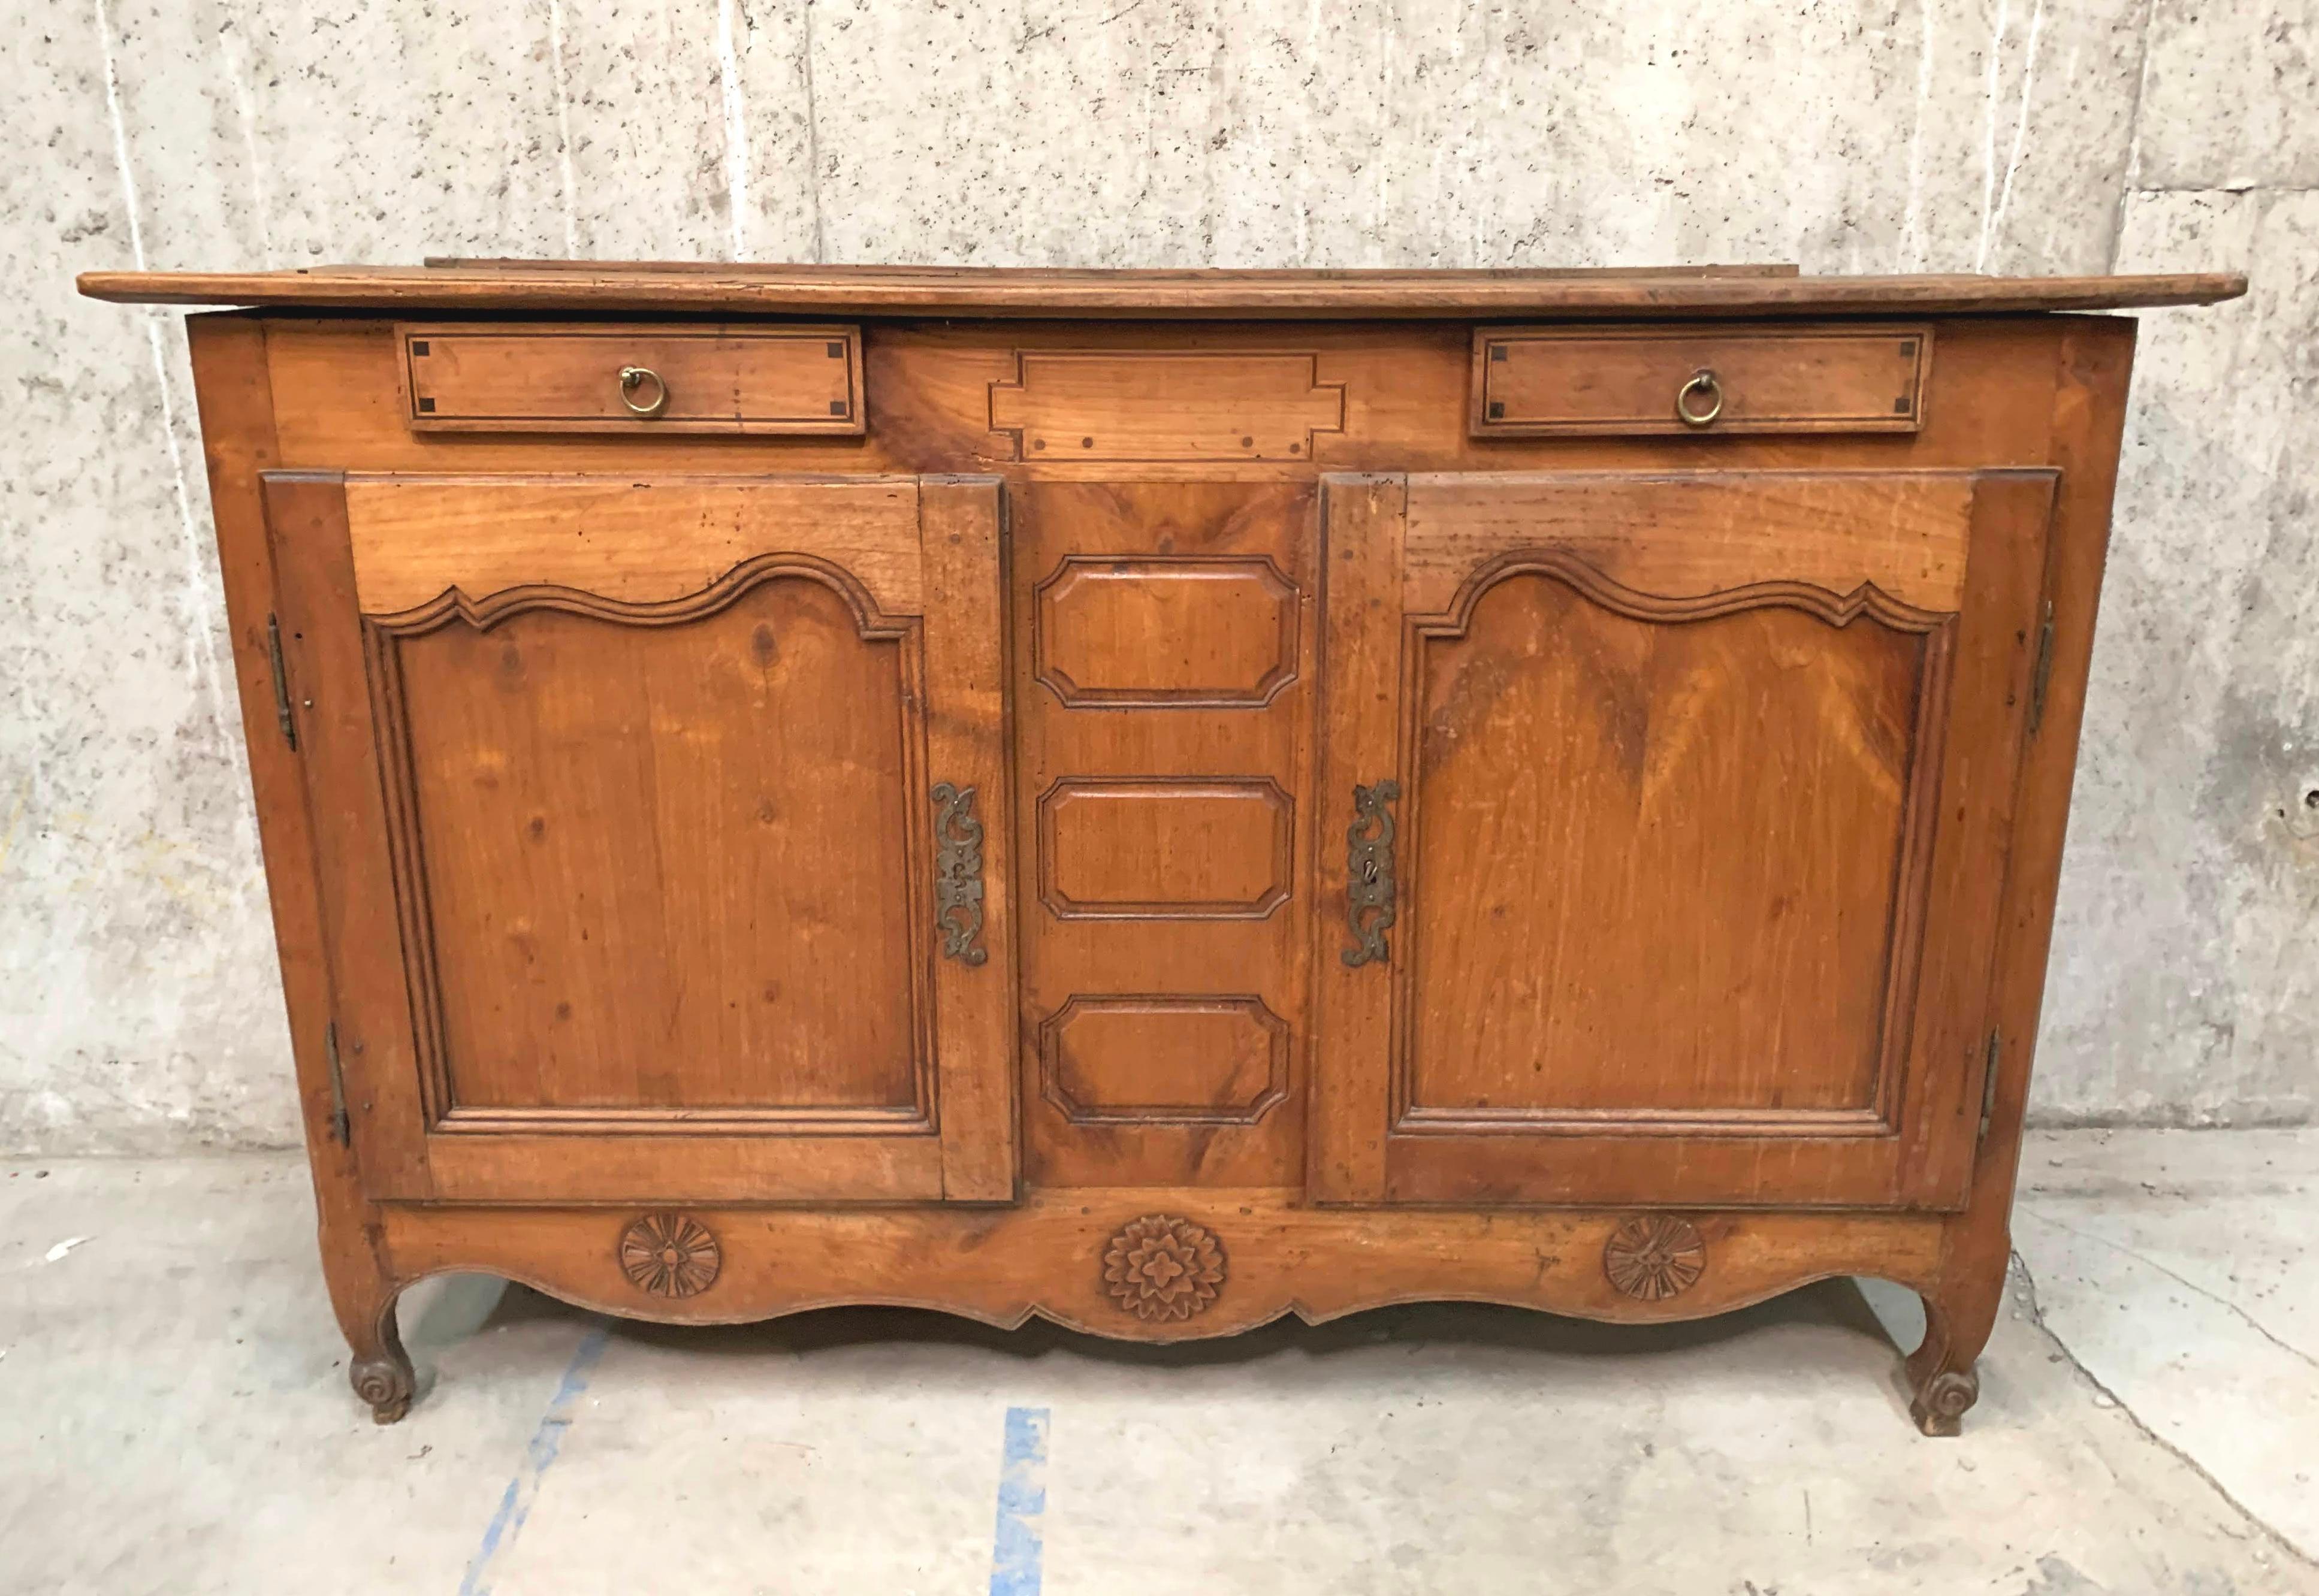 Antique French Tall Cherrywood Shallow Depth Buffet With Dish Display In Good Condition For Sale In Sheridan, CO